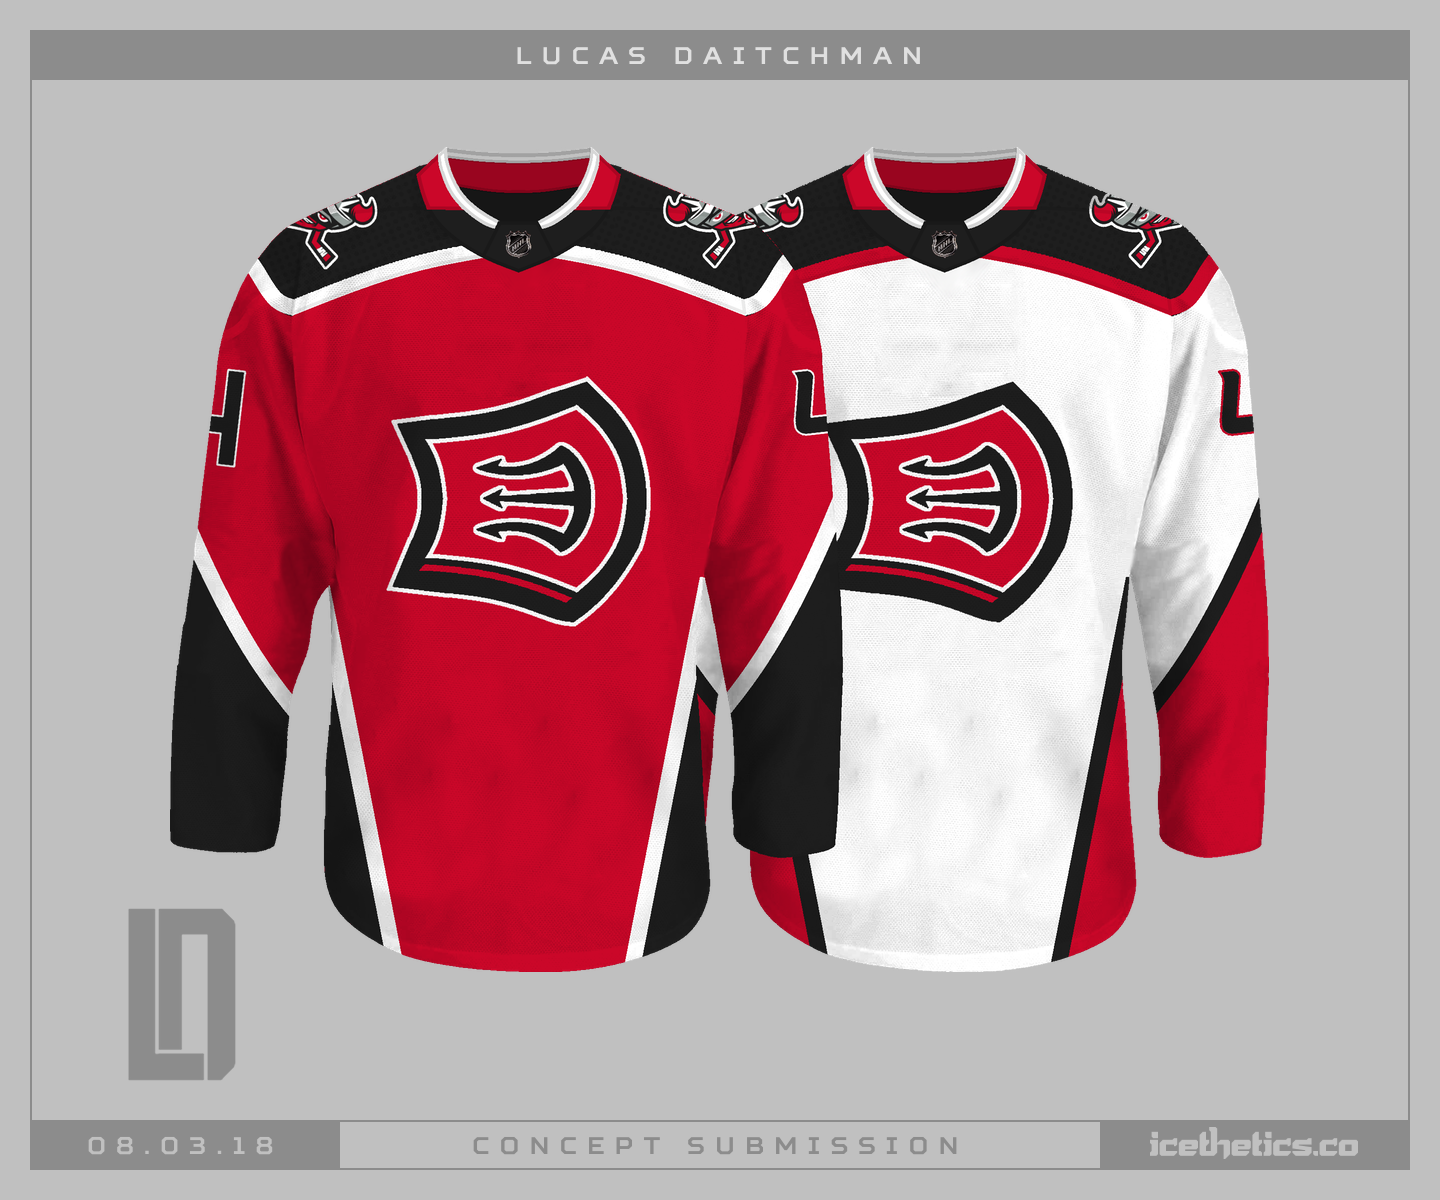 new jersey devils — Concepts 